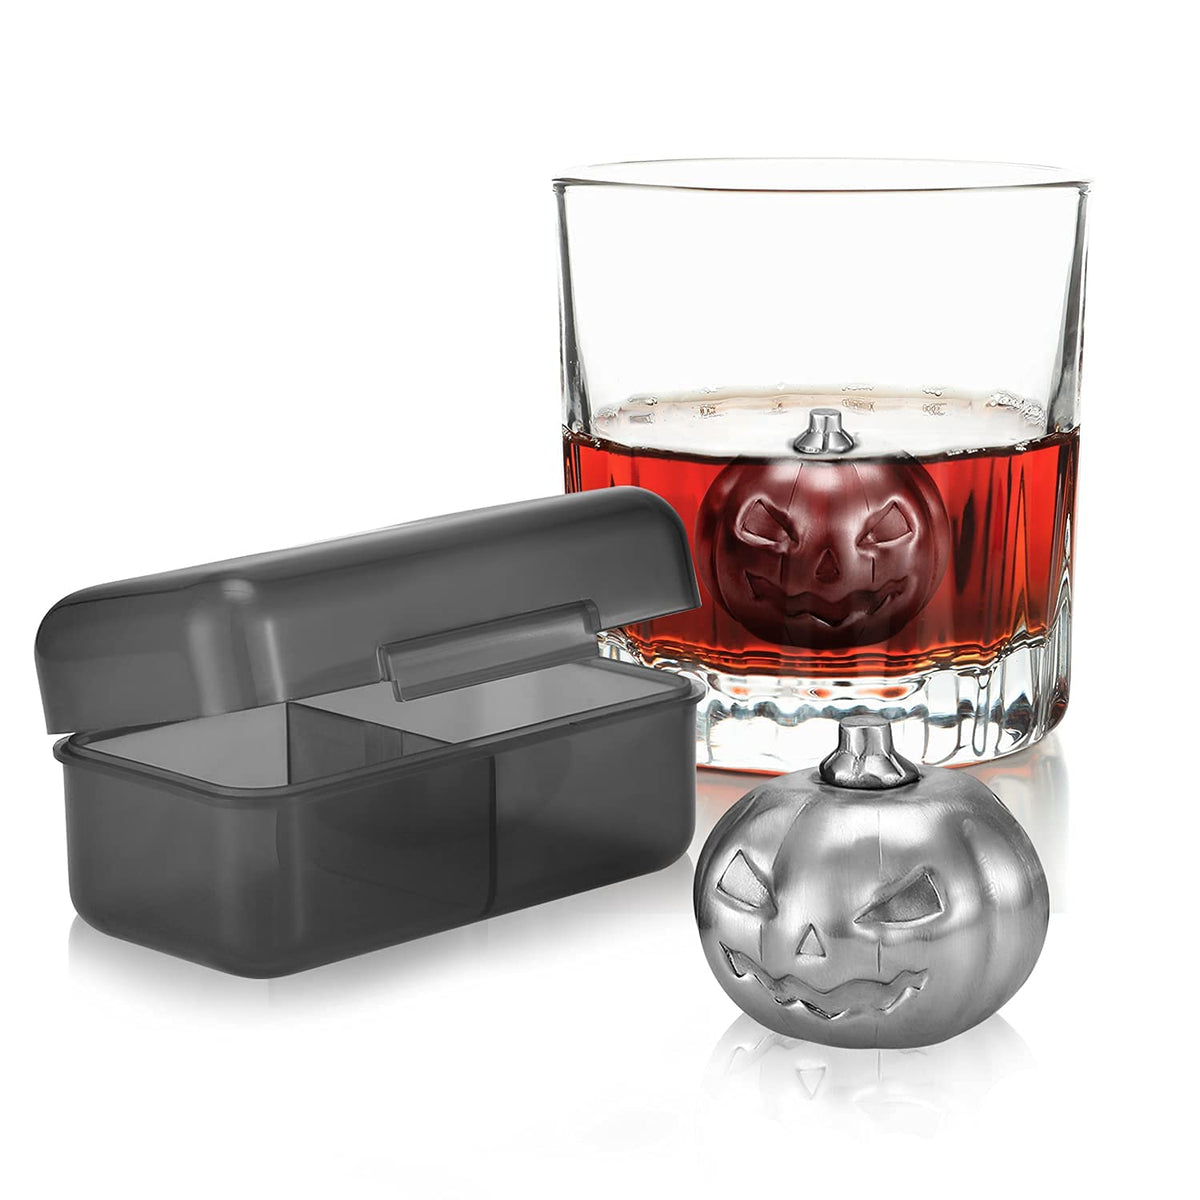 Halloween Ice Cube Tray | whiskey rocks embossed with spooky designs |  Halloween party idea, gift for goblins and ghouls